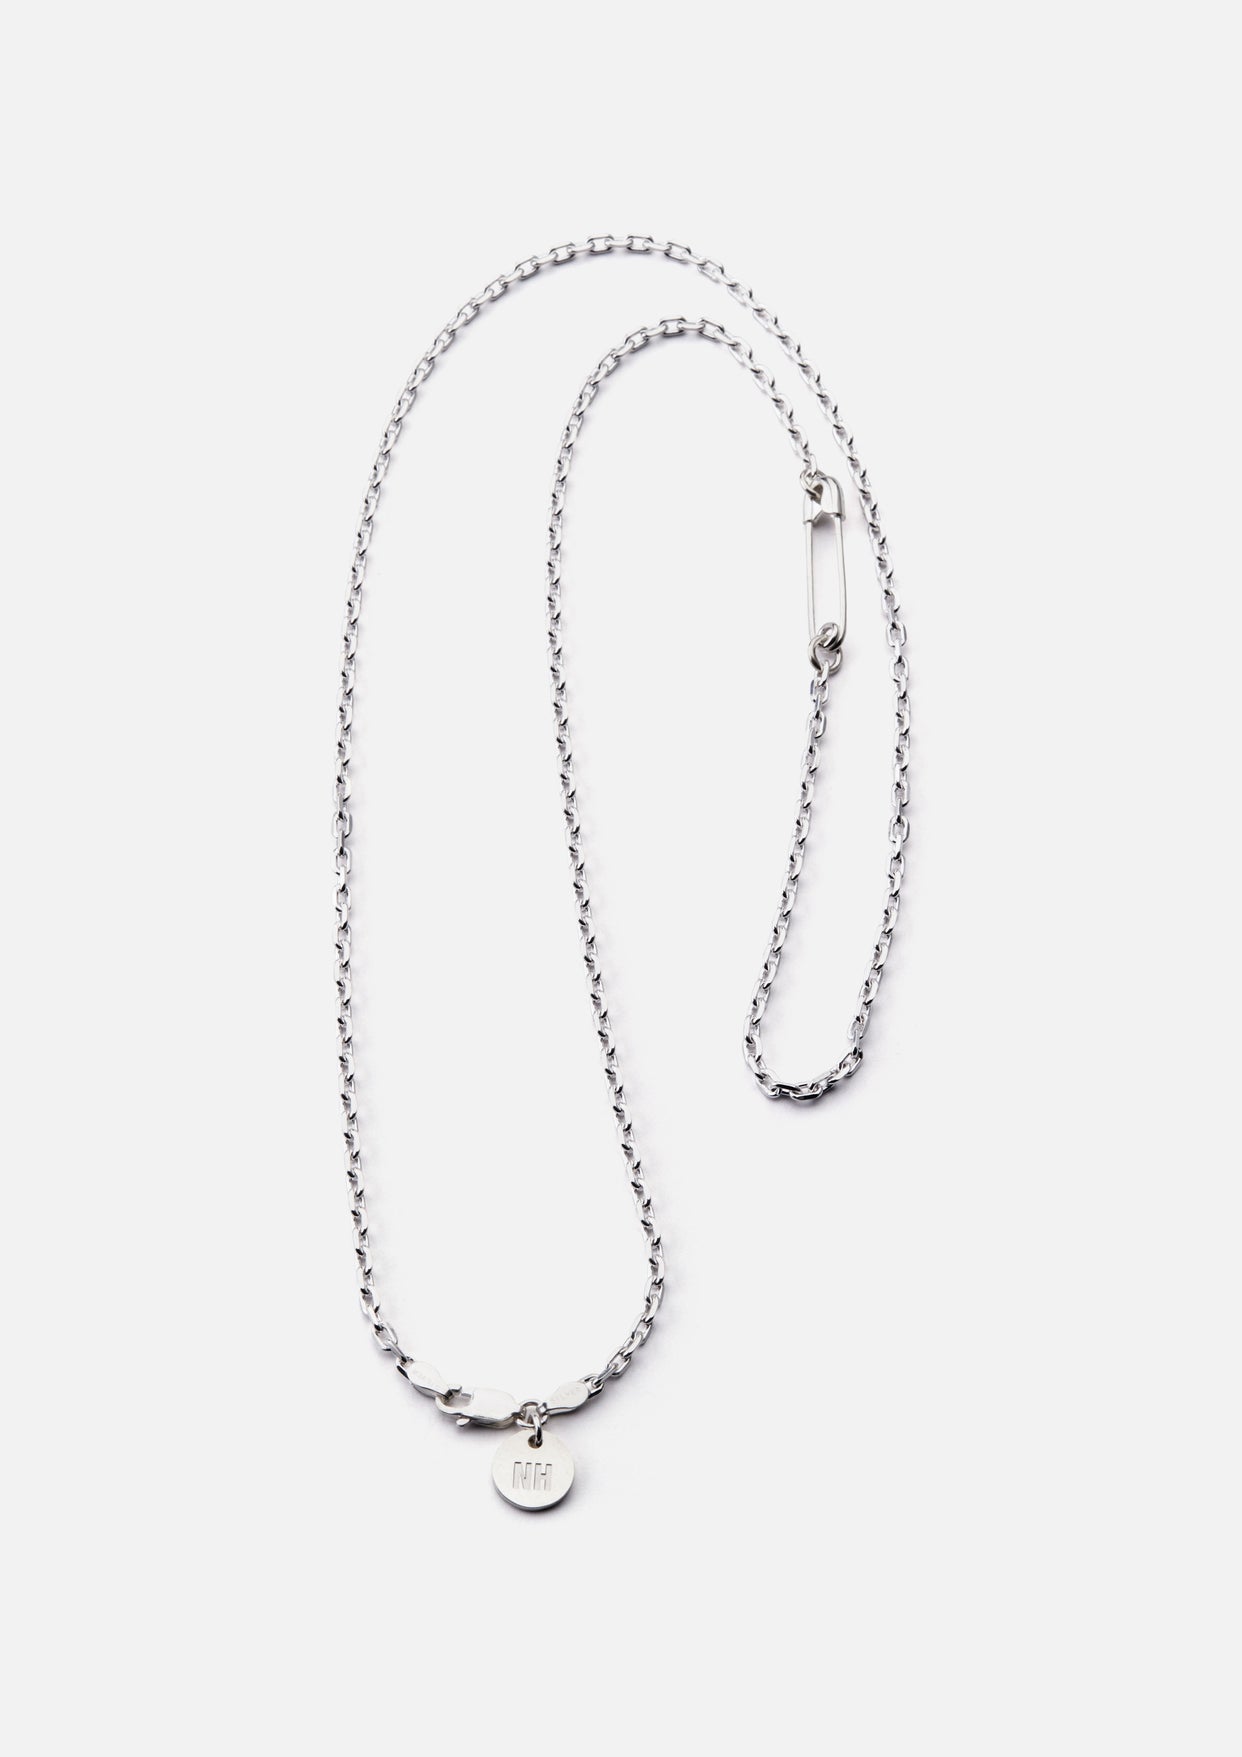 NEIGHBORHOOD SILVER SAFETY PIN NECKLACE | ethicsinsports.ch